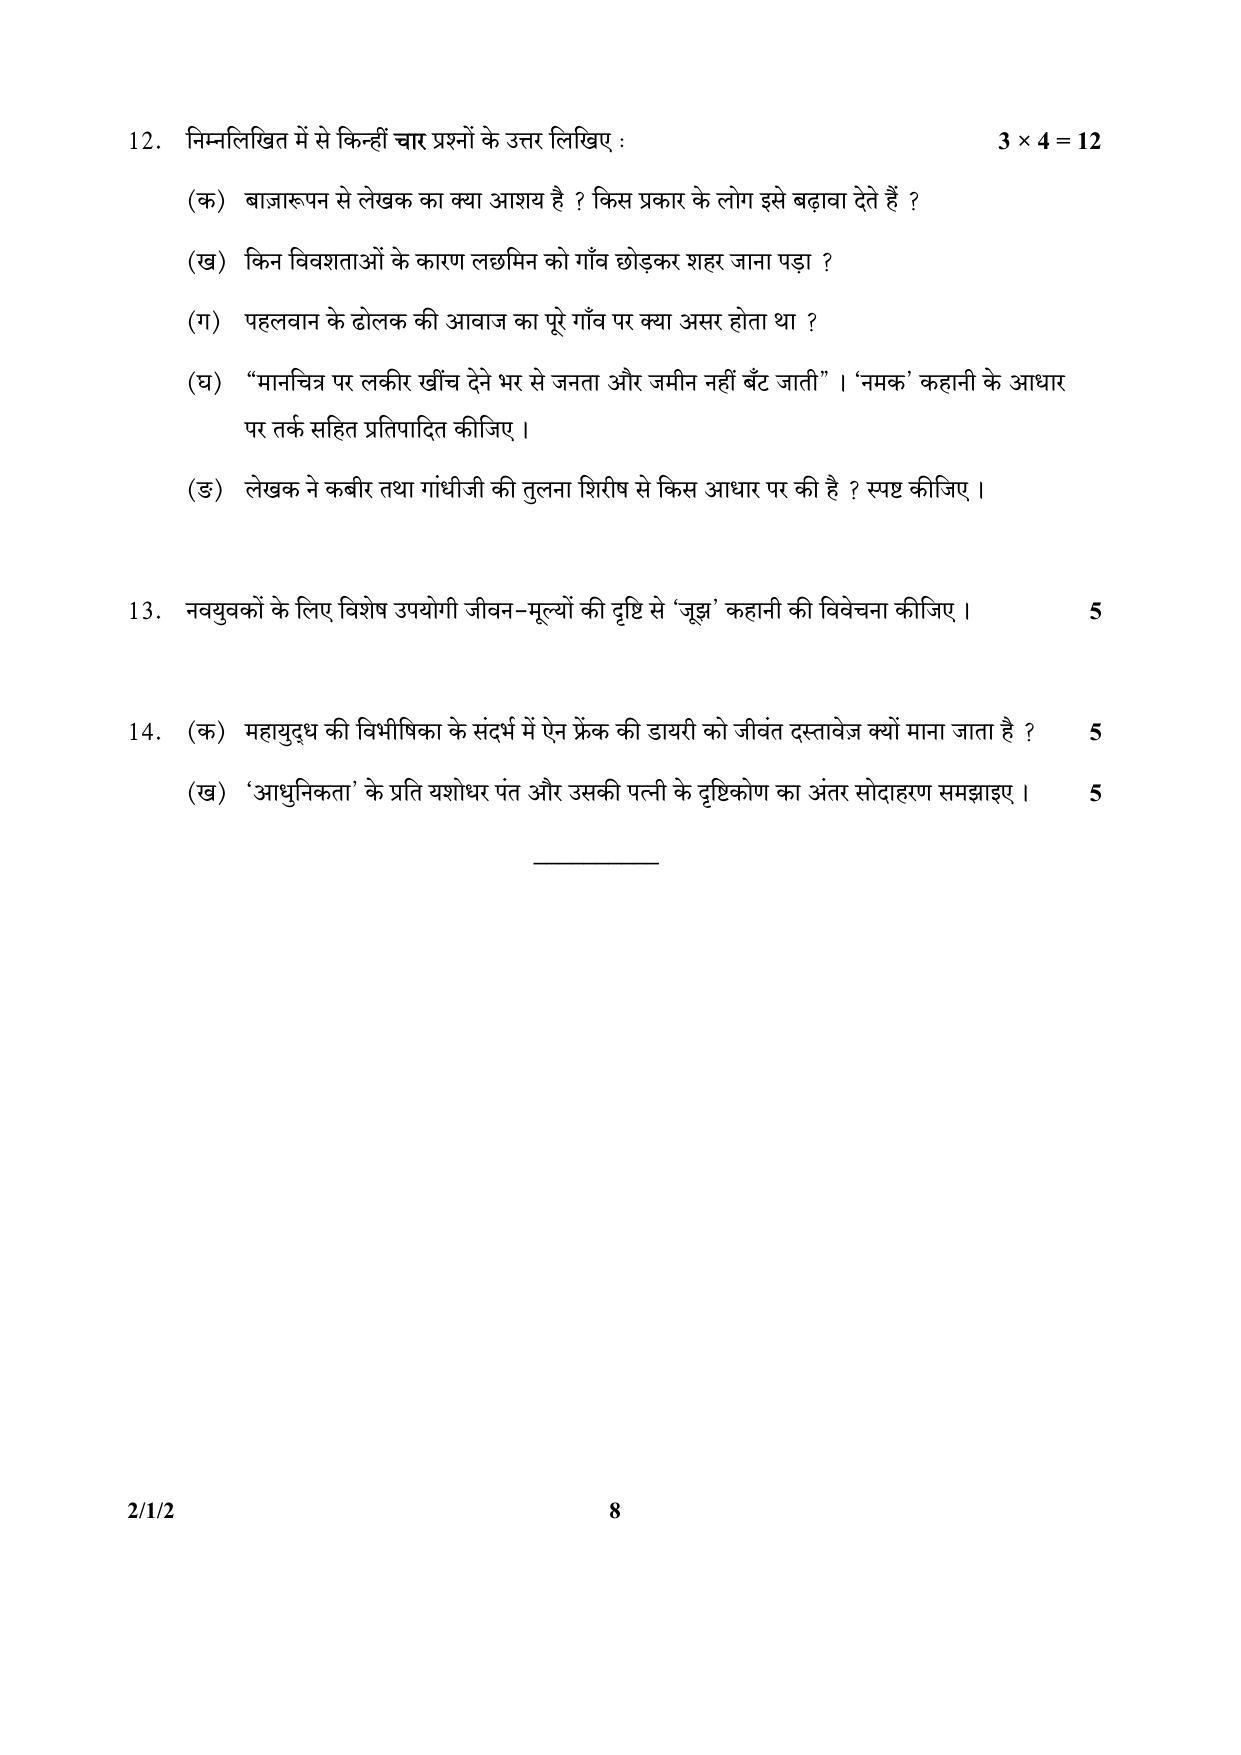 CBSE Class 12 2-1-2 (Hindi) 2017-comptt Question Paper - Page 8